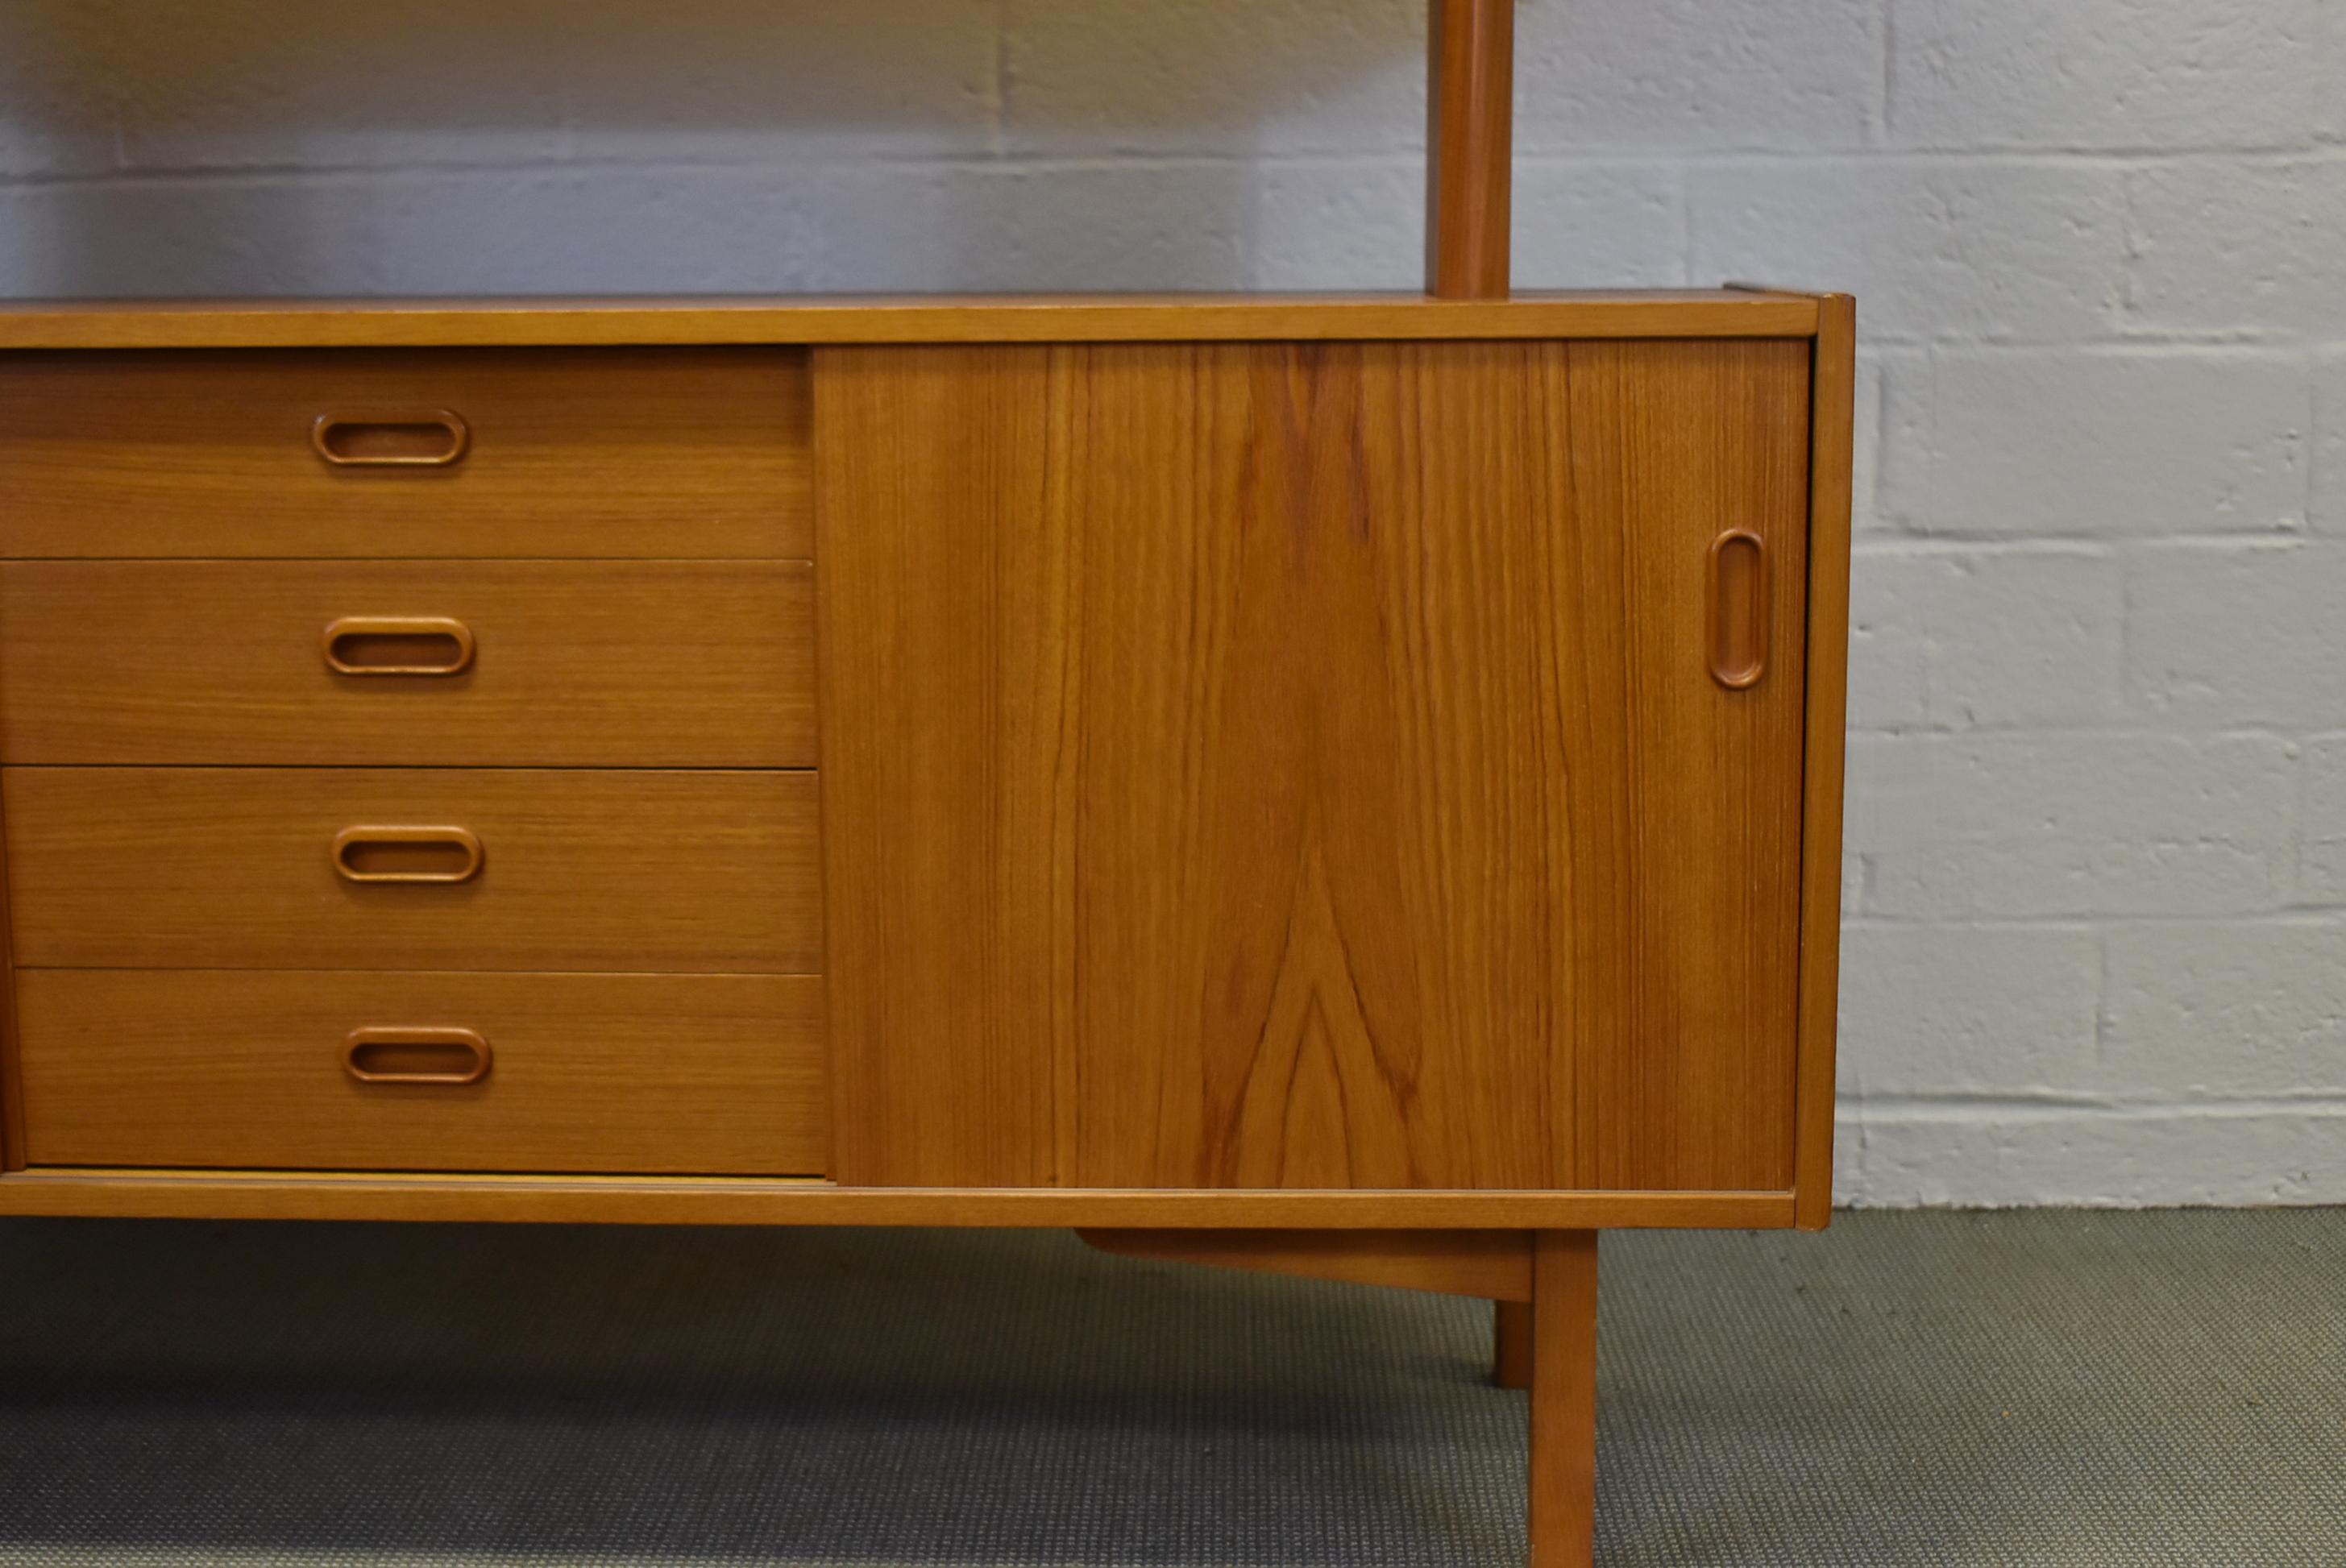 Mid-Century Modern Danish teak credenza with display top by Falster. Two doors conceal adjustable shelves. Removeable display cabinet top. It has two sliding glass doors with two adjustable shelves. Very nice to excellent condition. 55